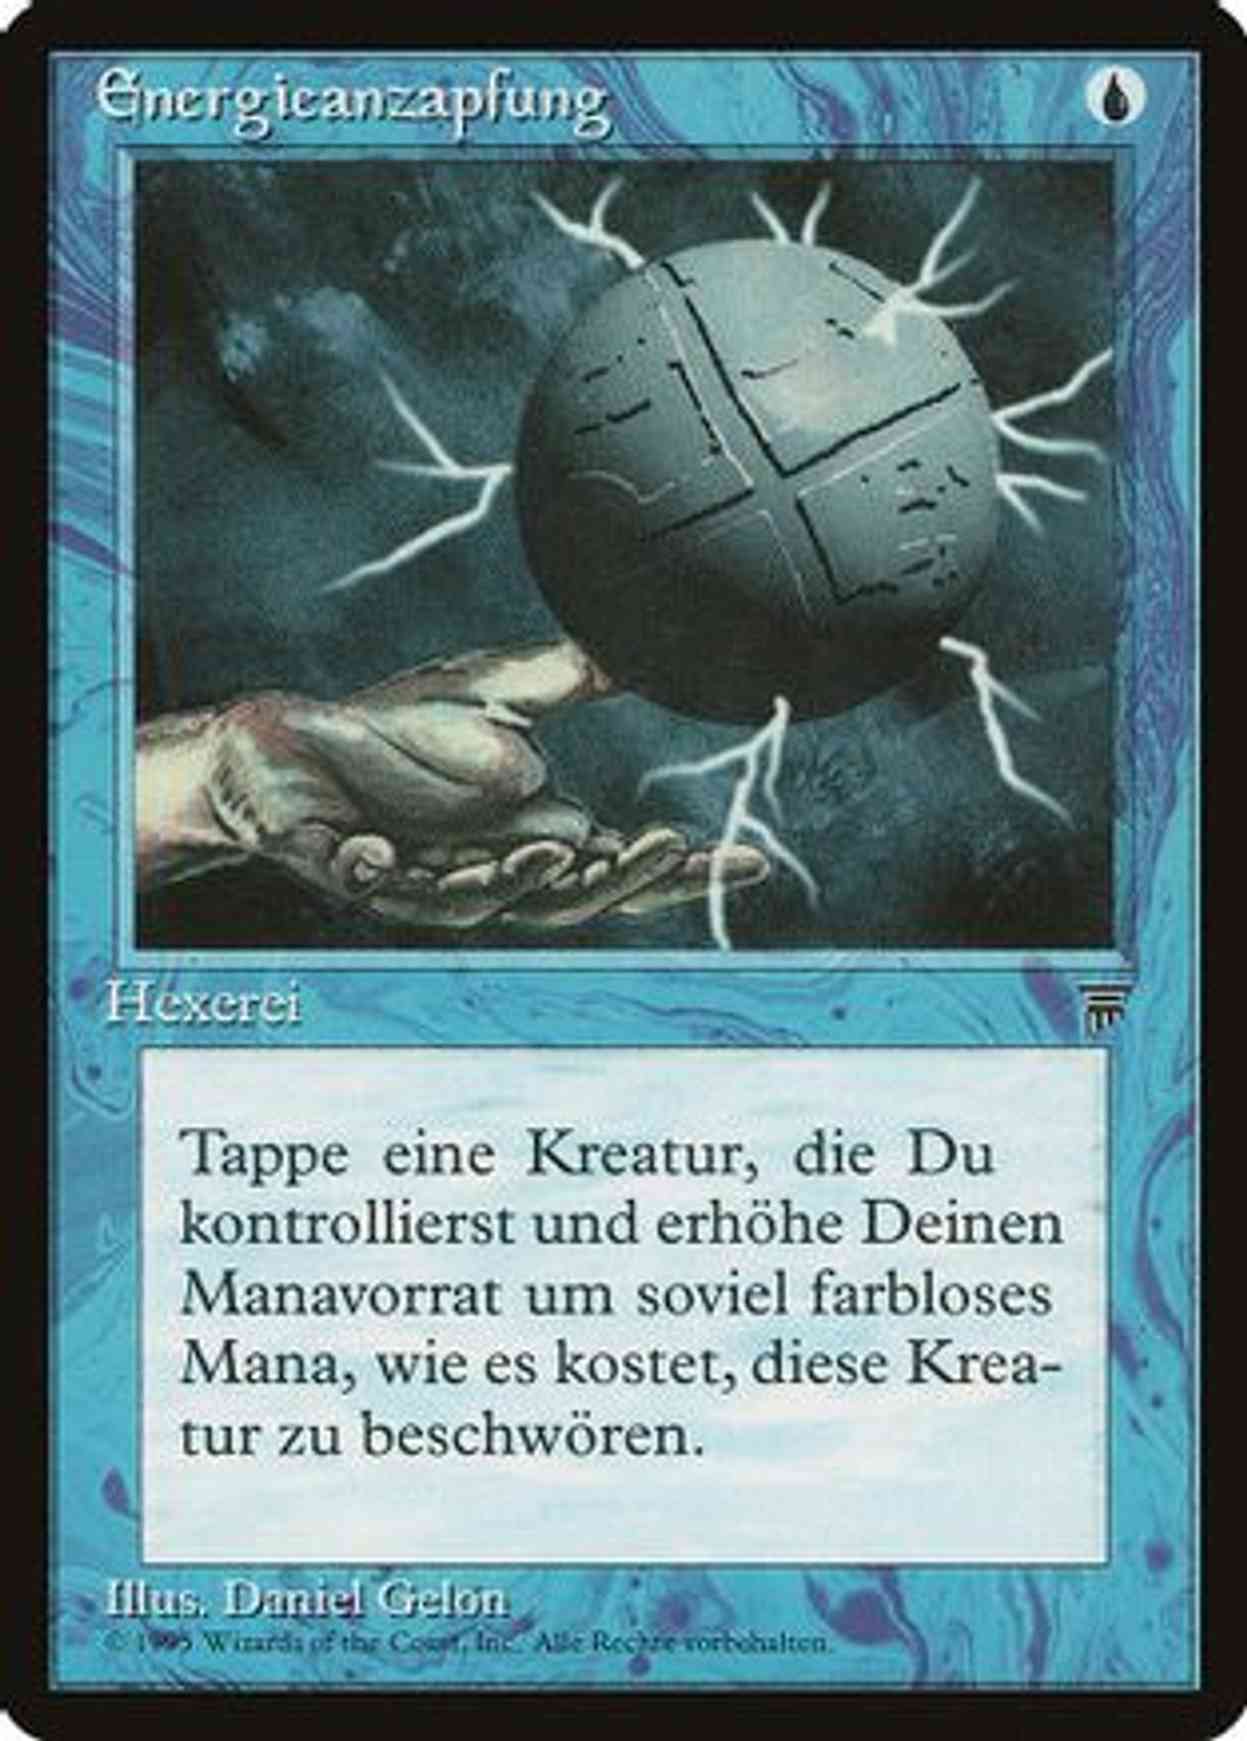 Energy Tap (German) - "Energieanzapfung" magic card front